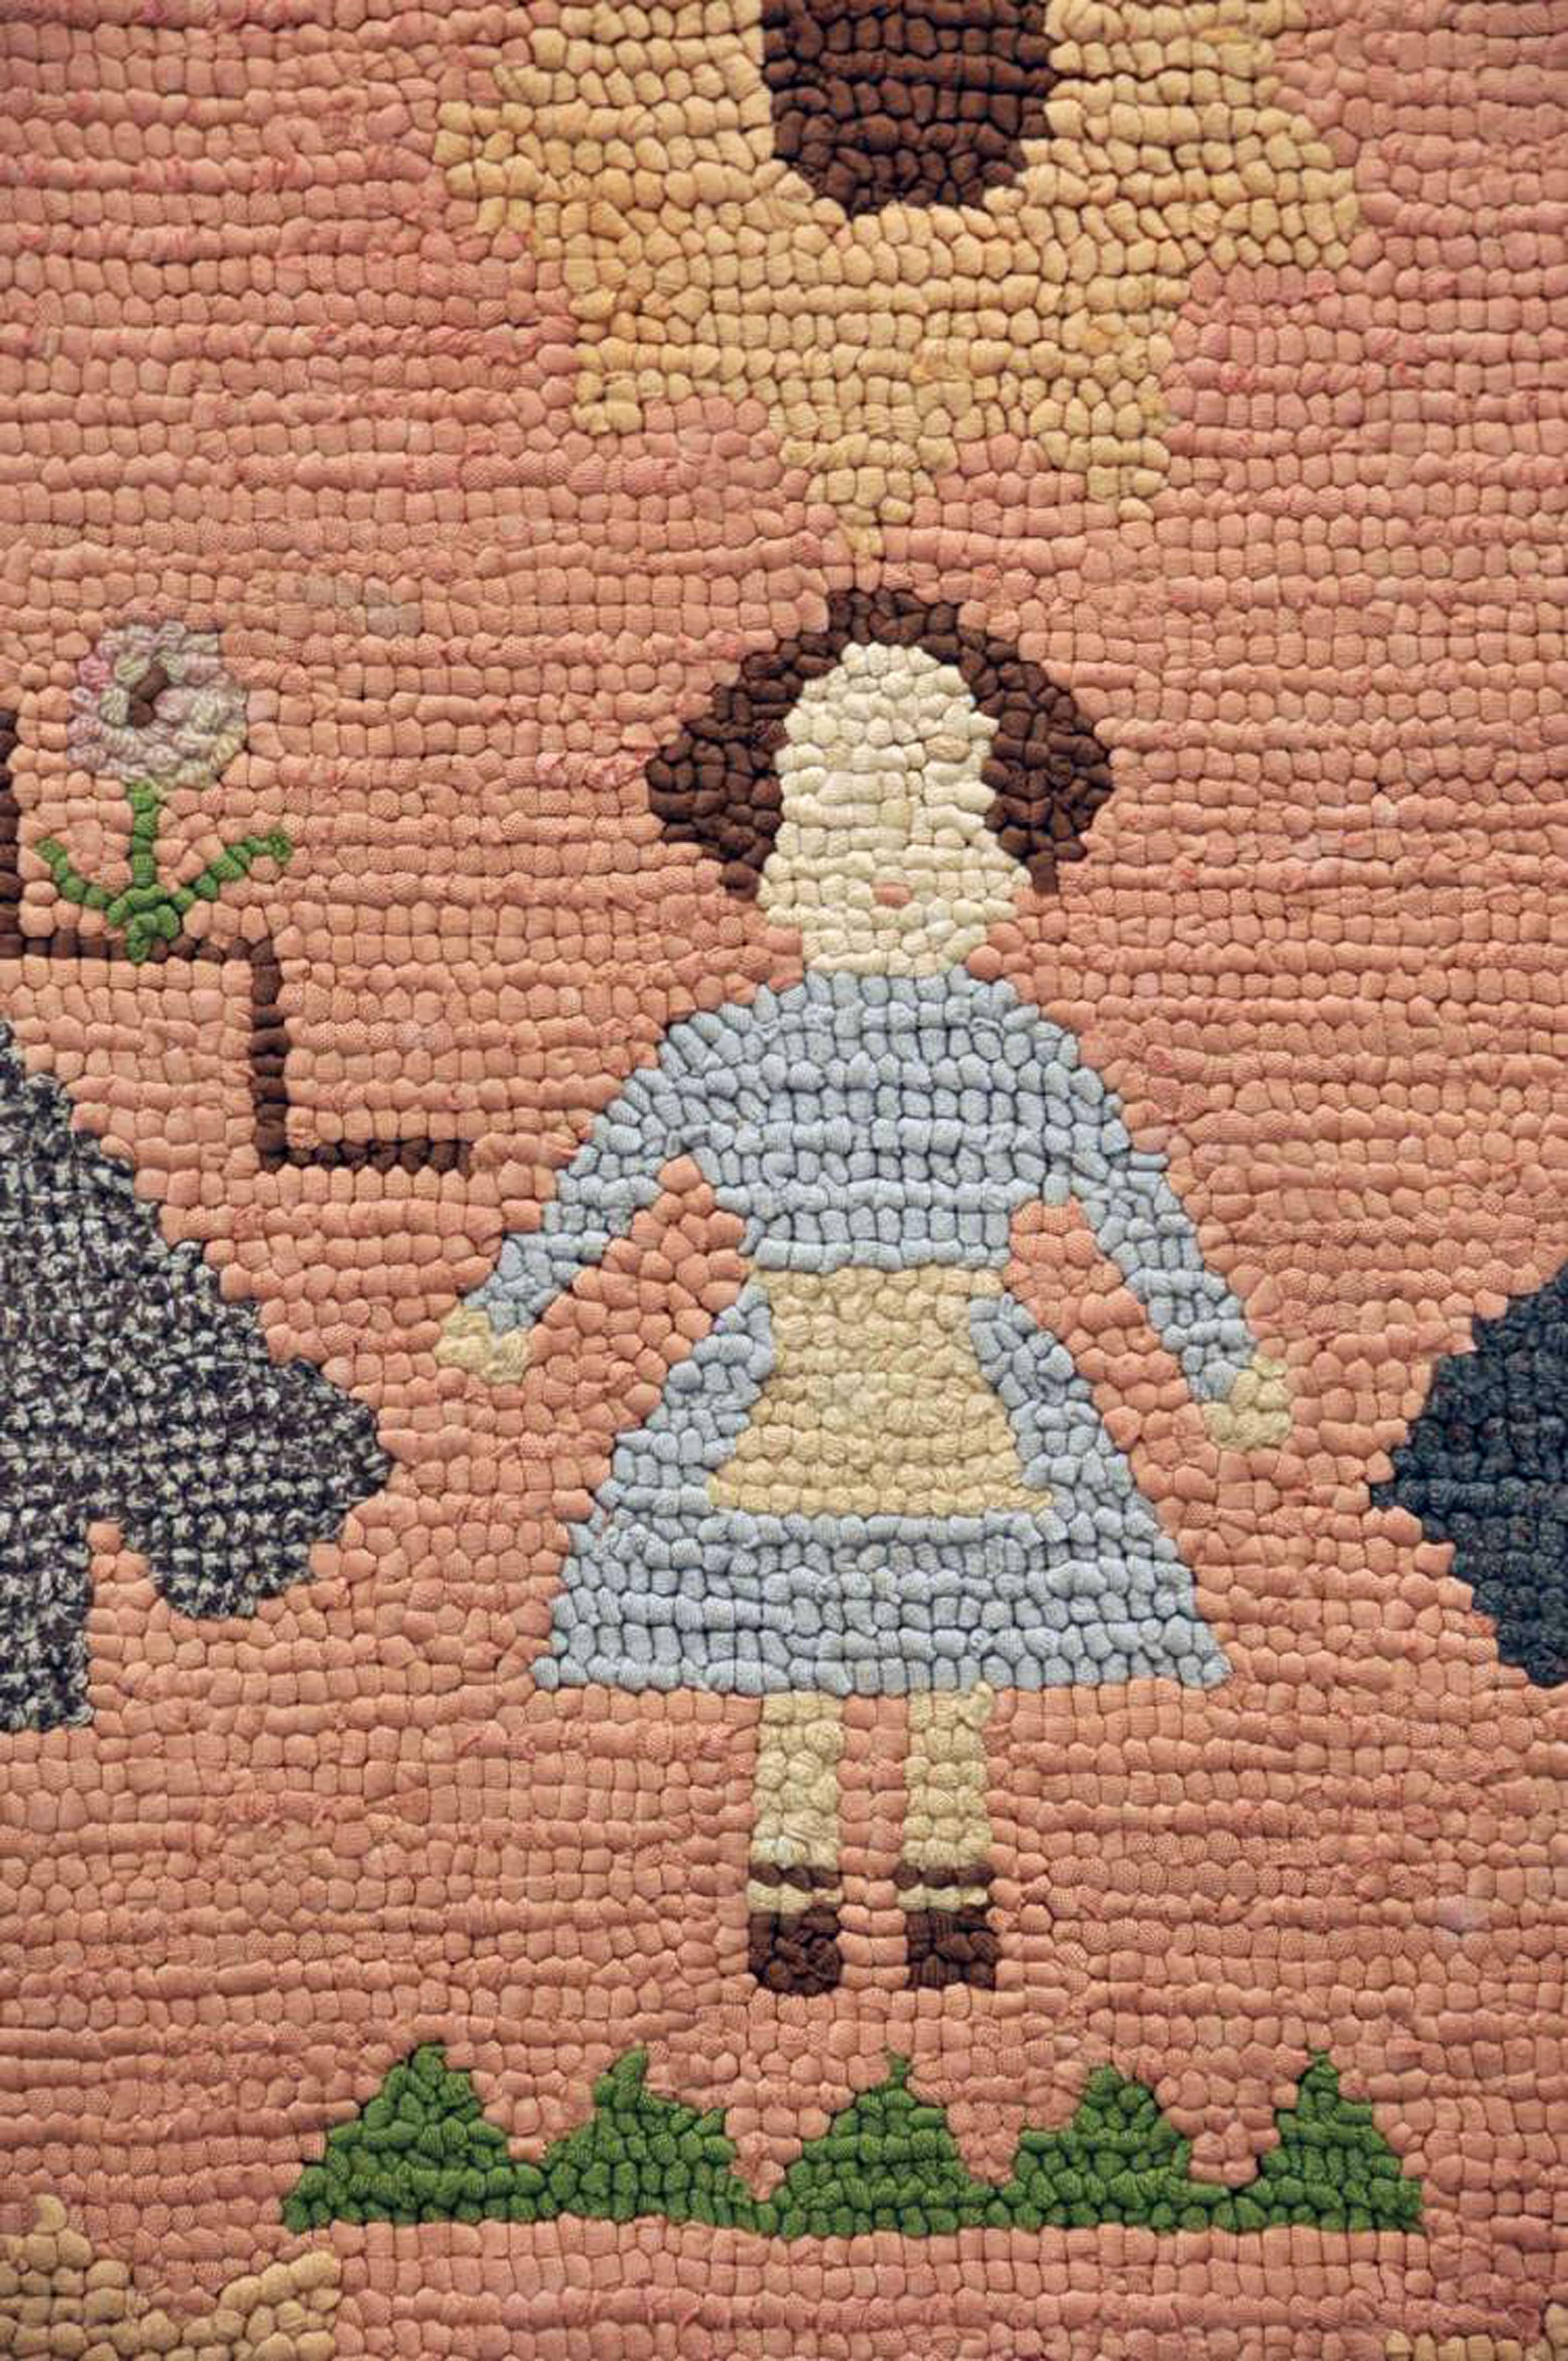 Wool American Folk Art Pictorial Hooked Rug, Mounted on Stretcher, Late 19th Century